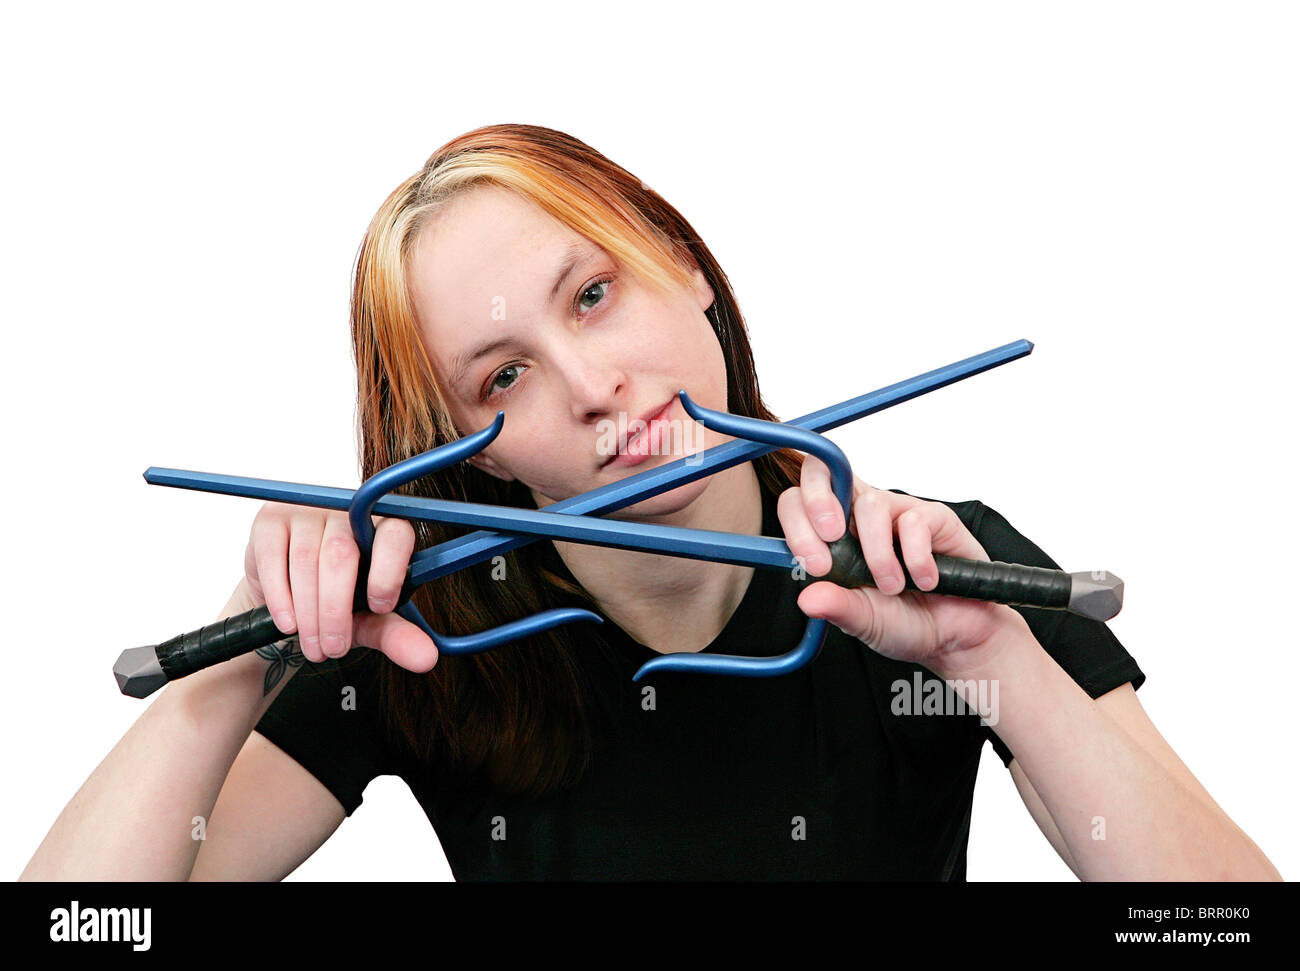 beautiful MMA young woman ready with crossed blue sai weapons over white Stock Photo